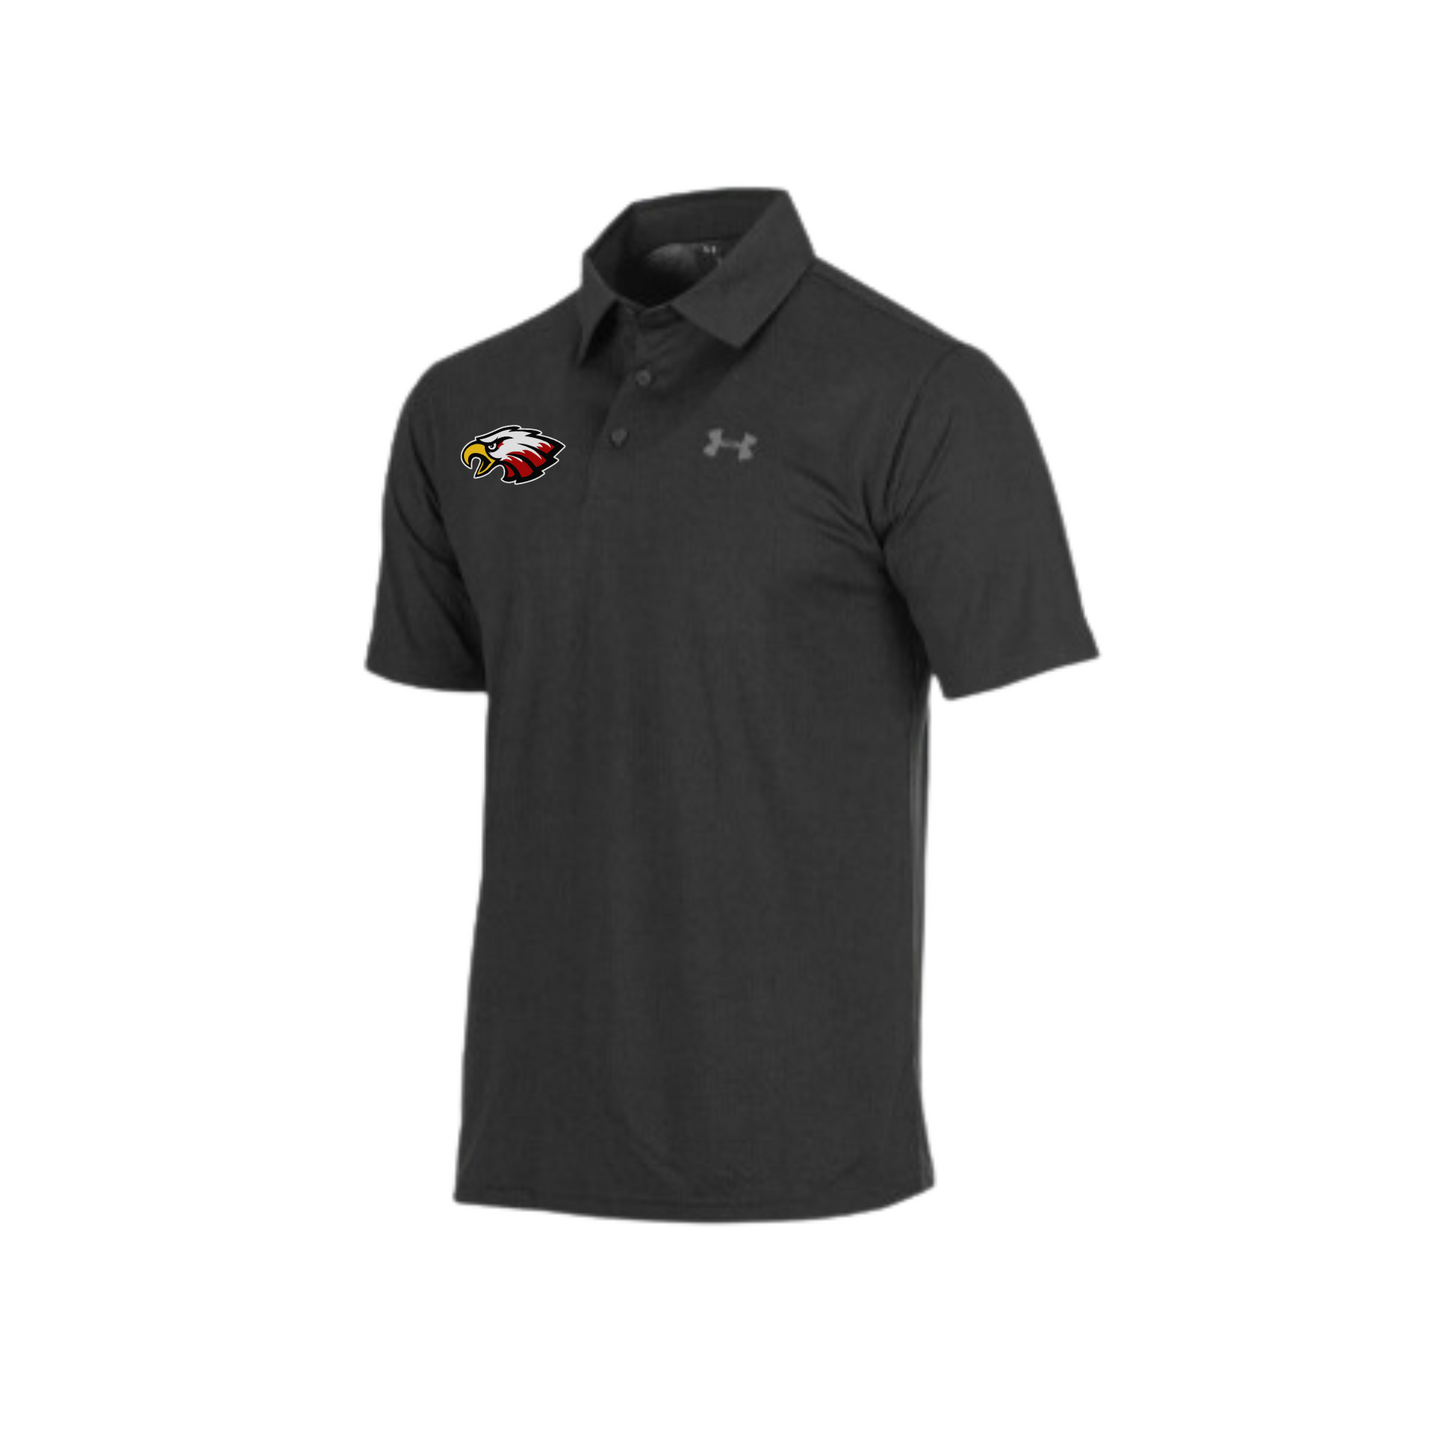 SOBOCO Unisex Adult Under Armour 2.0 Playoff Polo